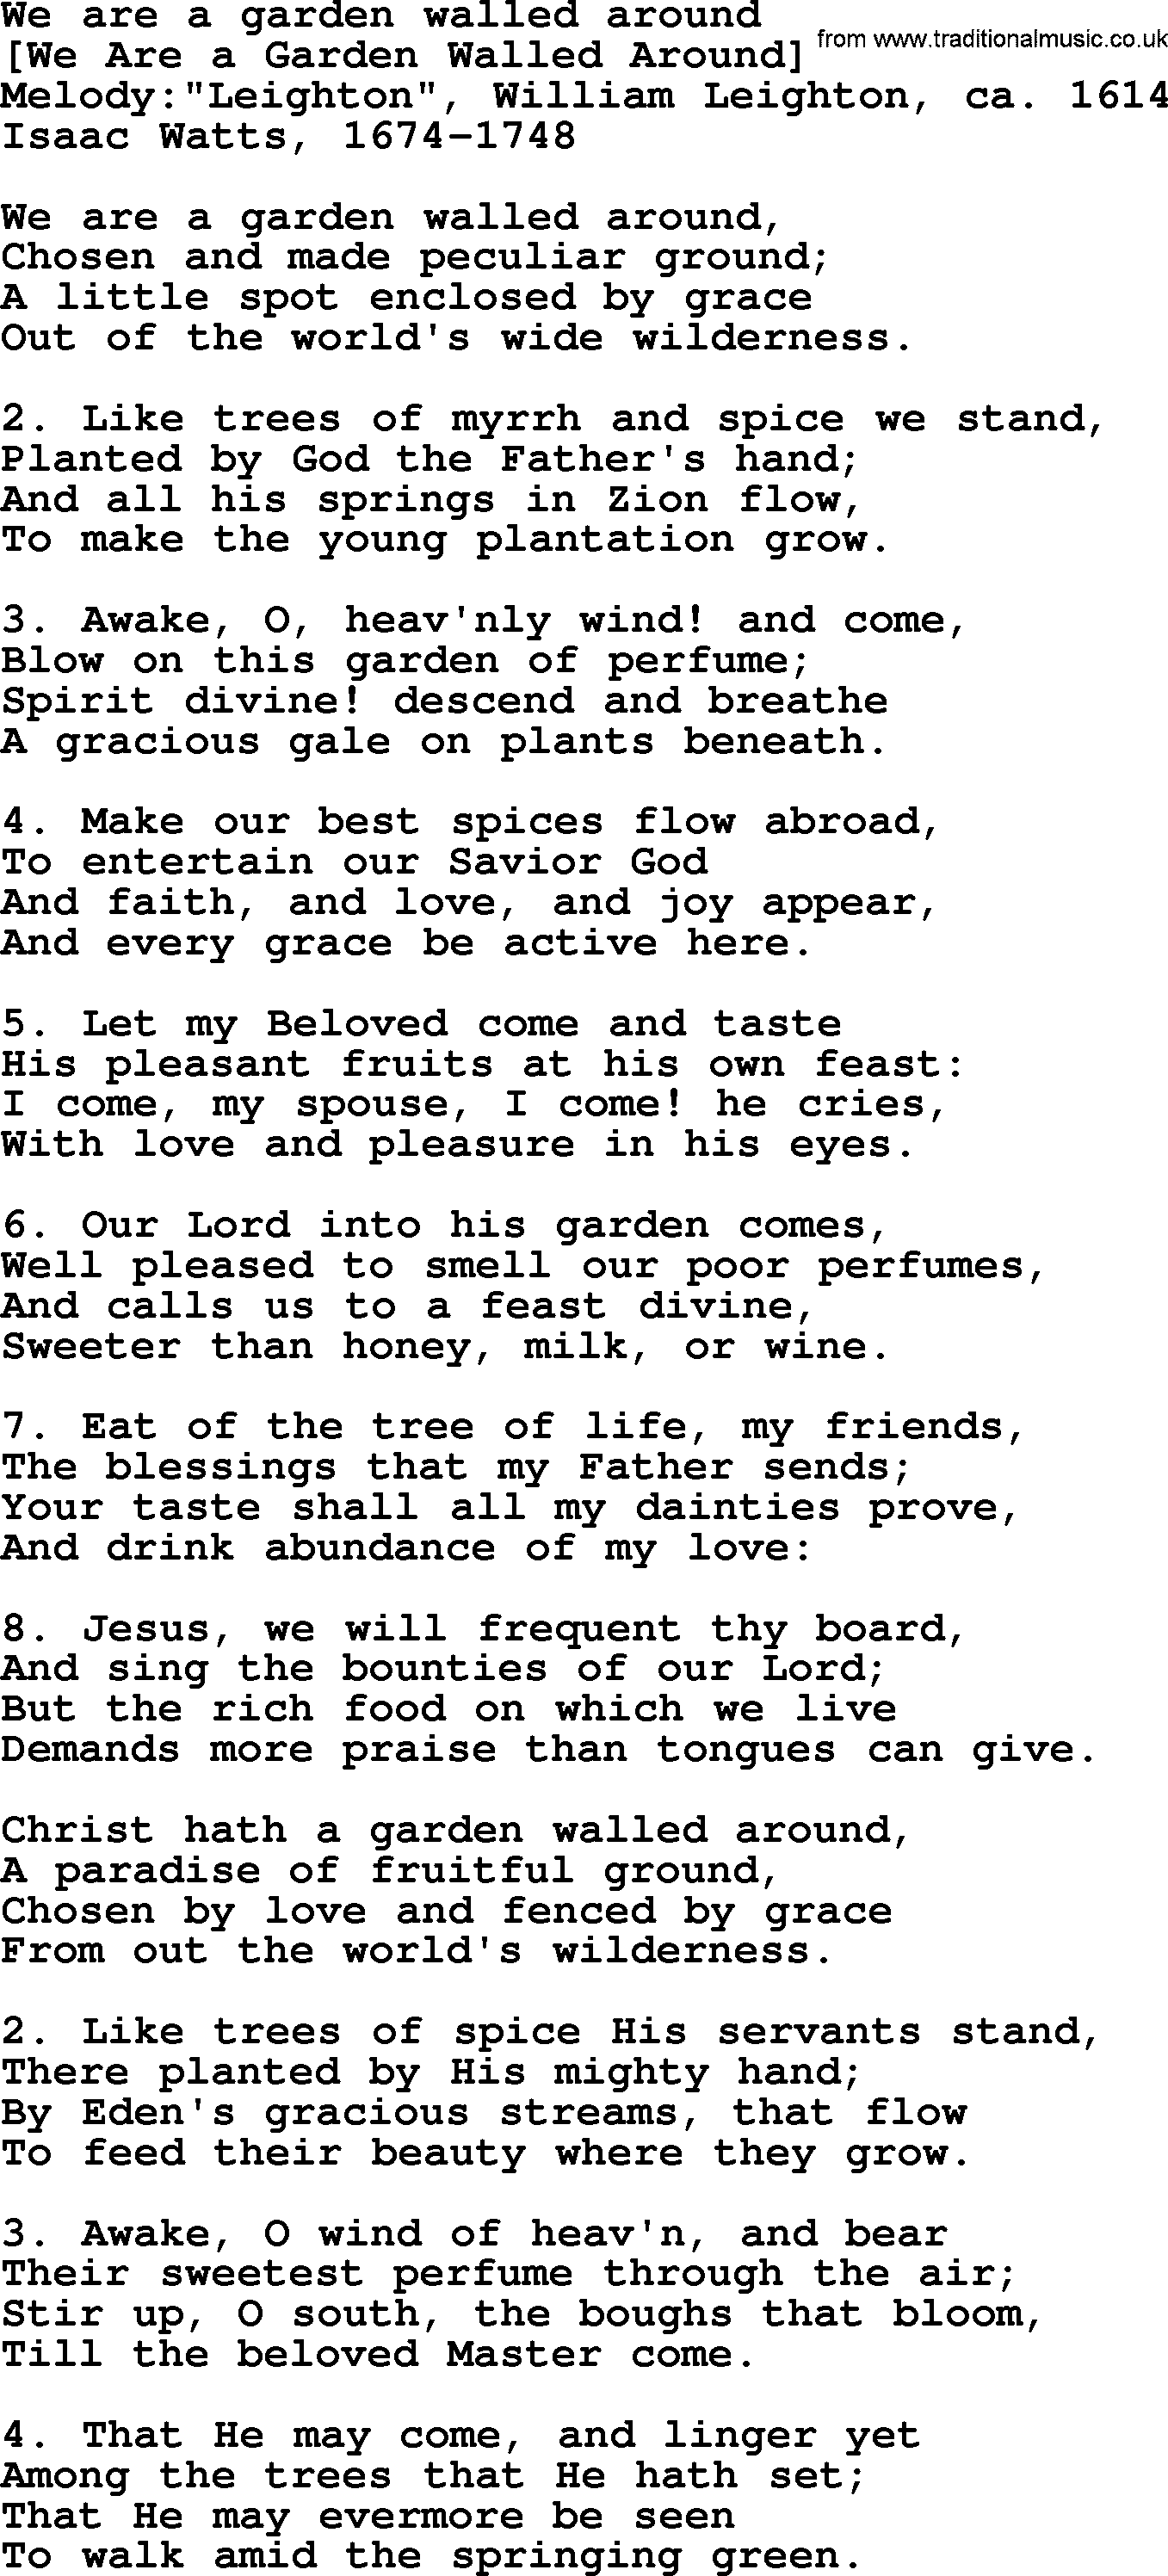 Old English Song: We Are A Garden Walled Around lyrics